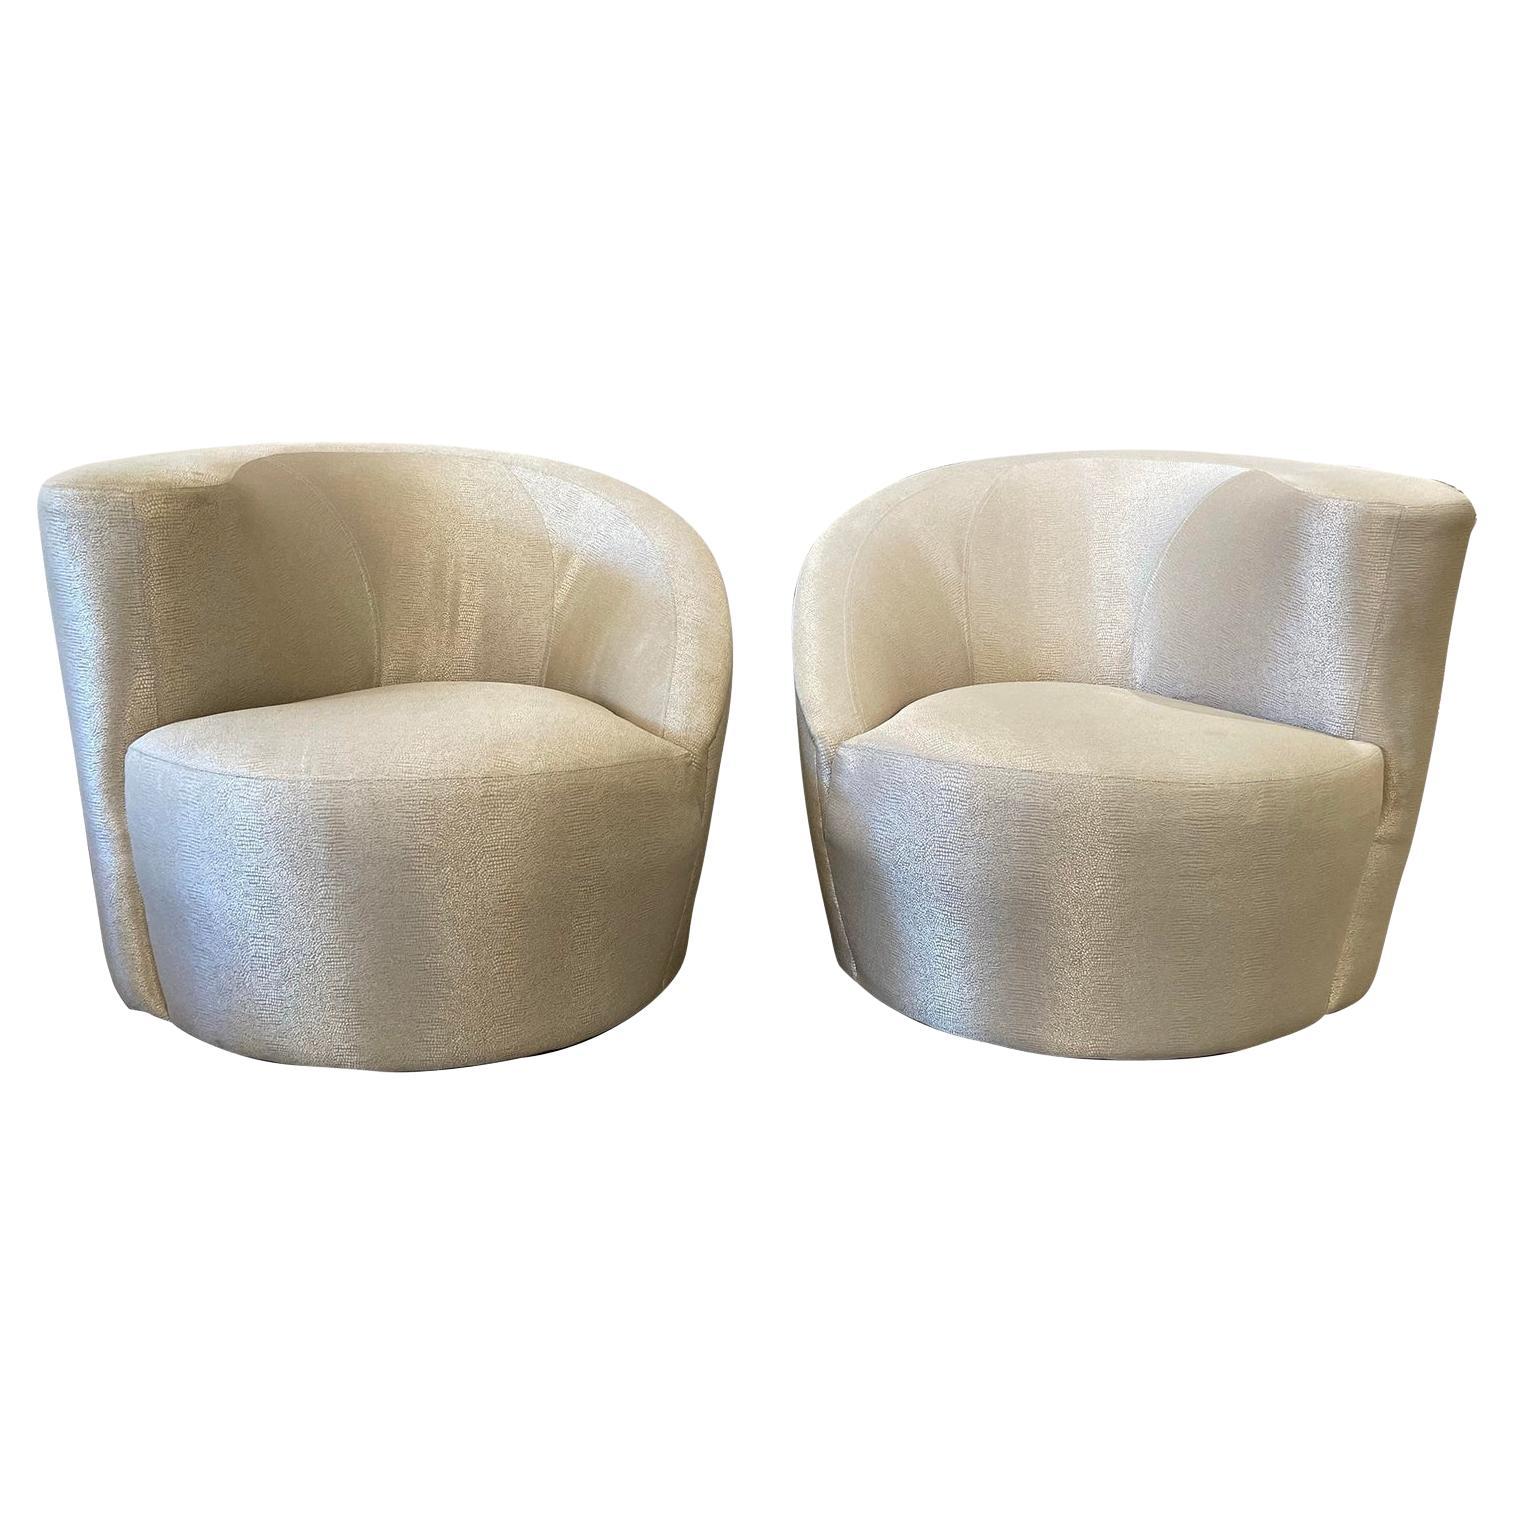 1970s Kagan Directional Nautilus Swivel Chairs Vintage - a Pair For Sale